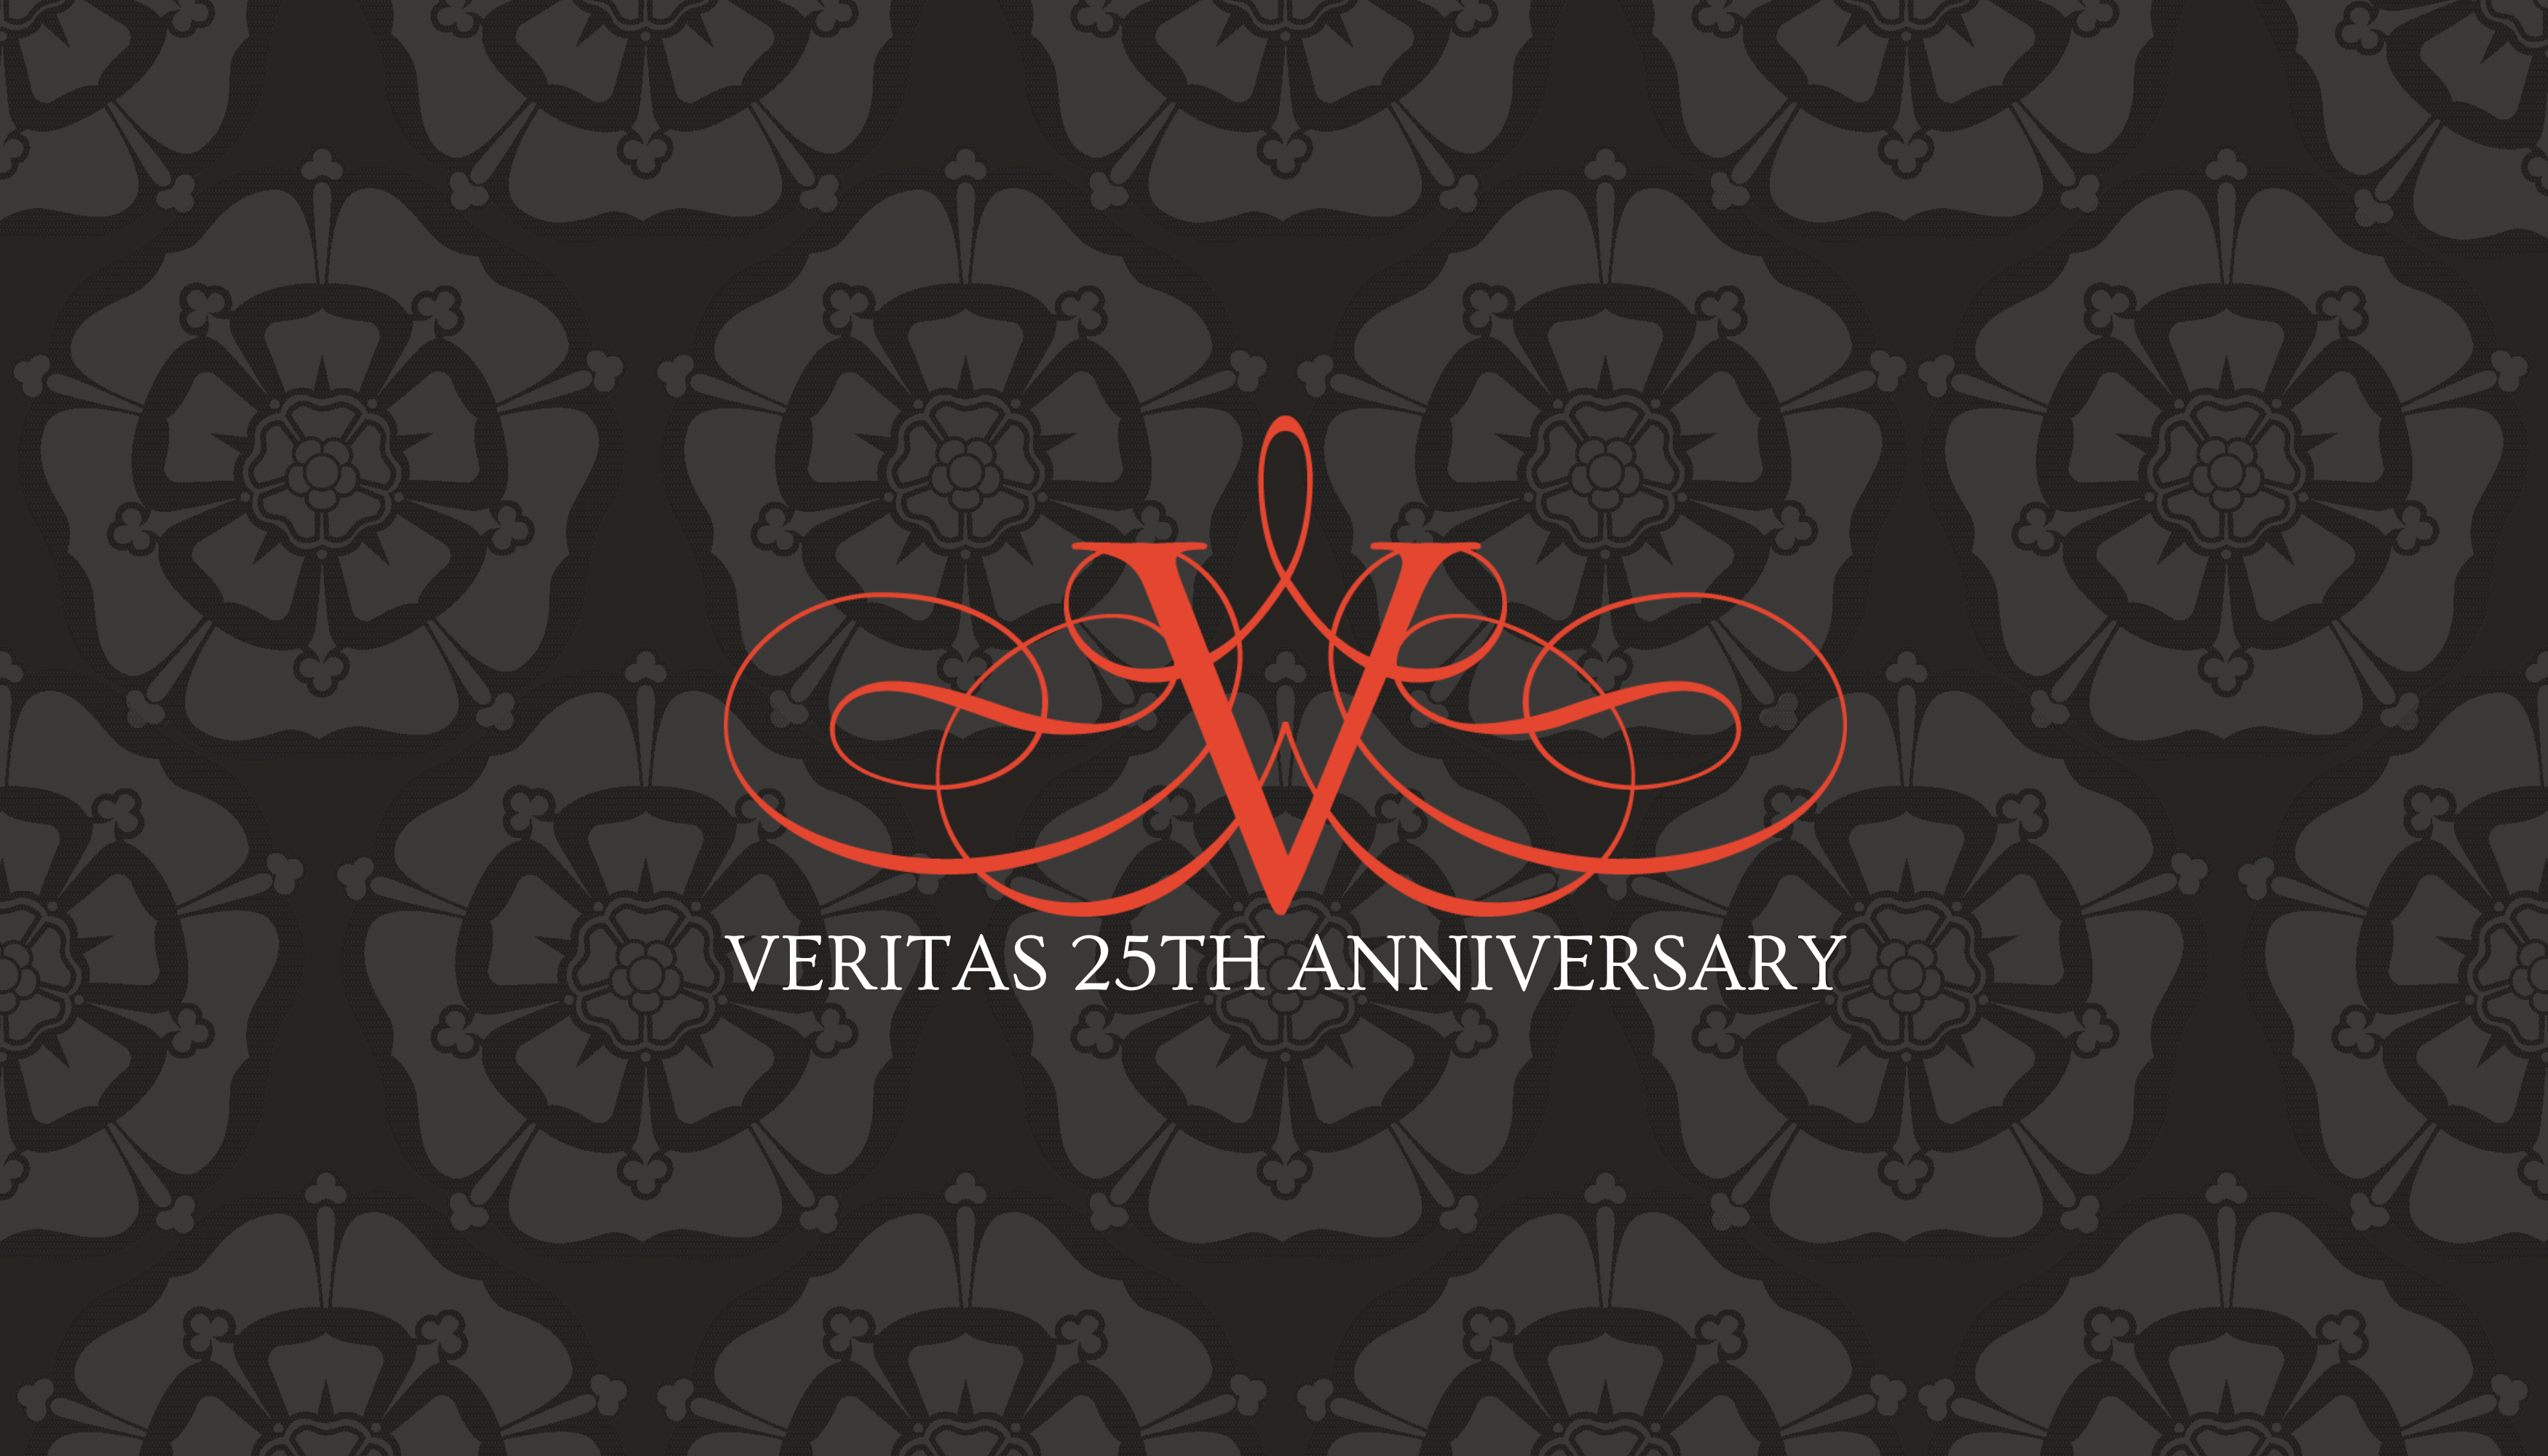 Veritas 25th anniversary logo in red with  white text on a black damask background. 